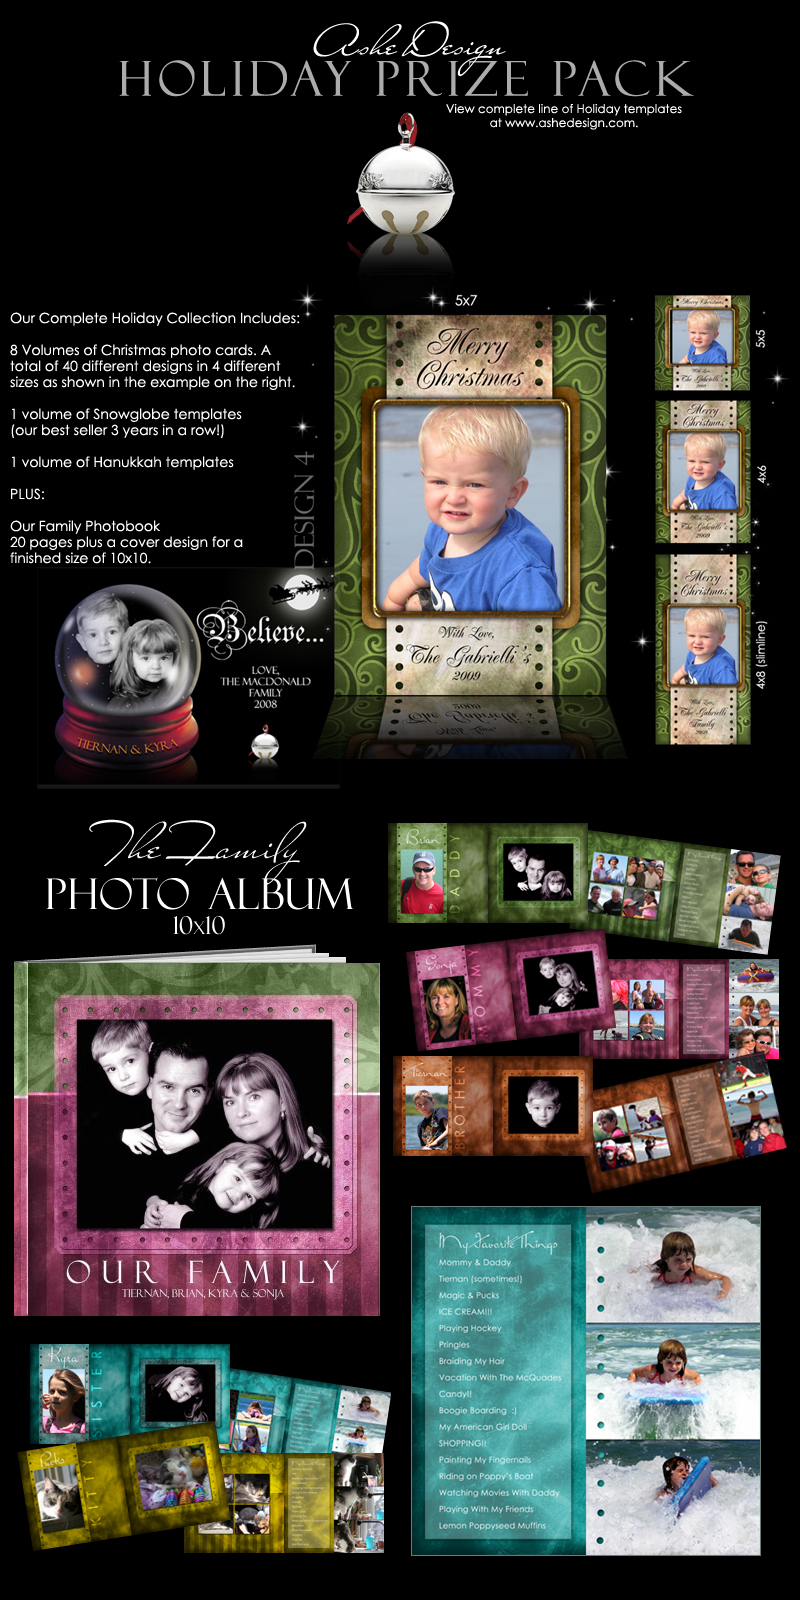 holidayprizepack Halloween Freebies + Win Holiday Templates Prize Pack Contests  